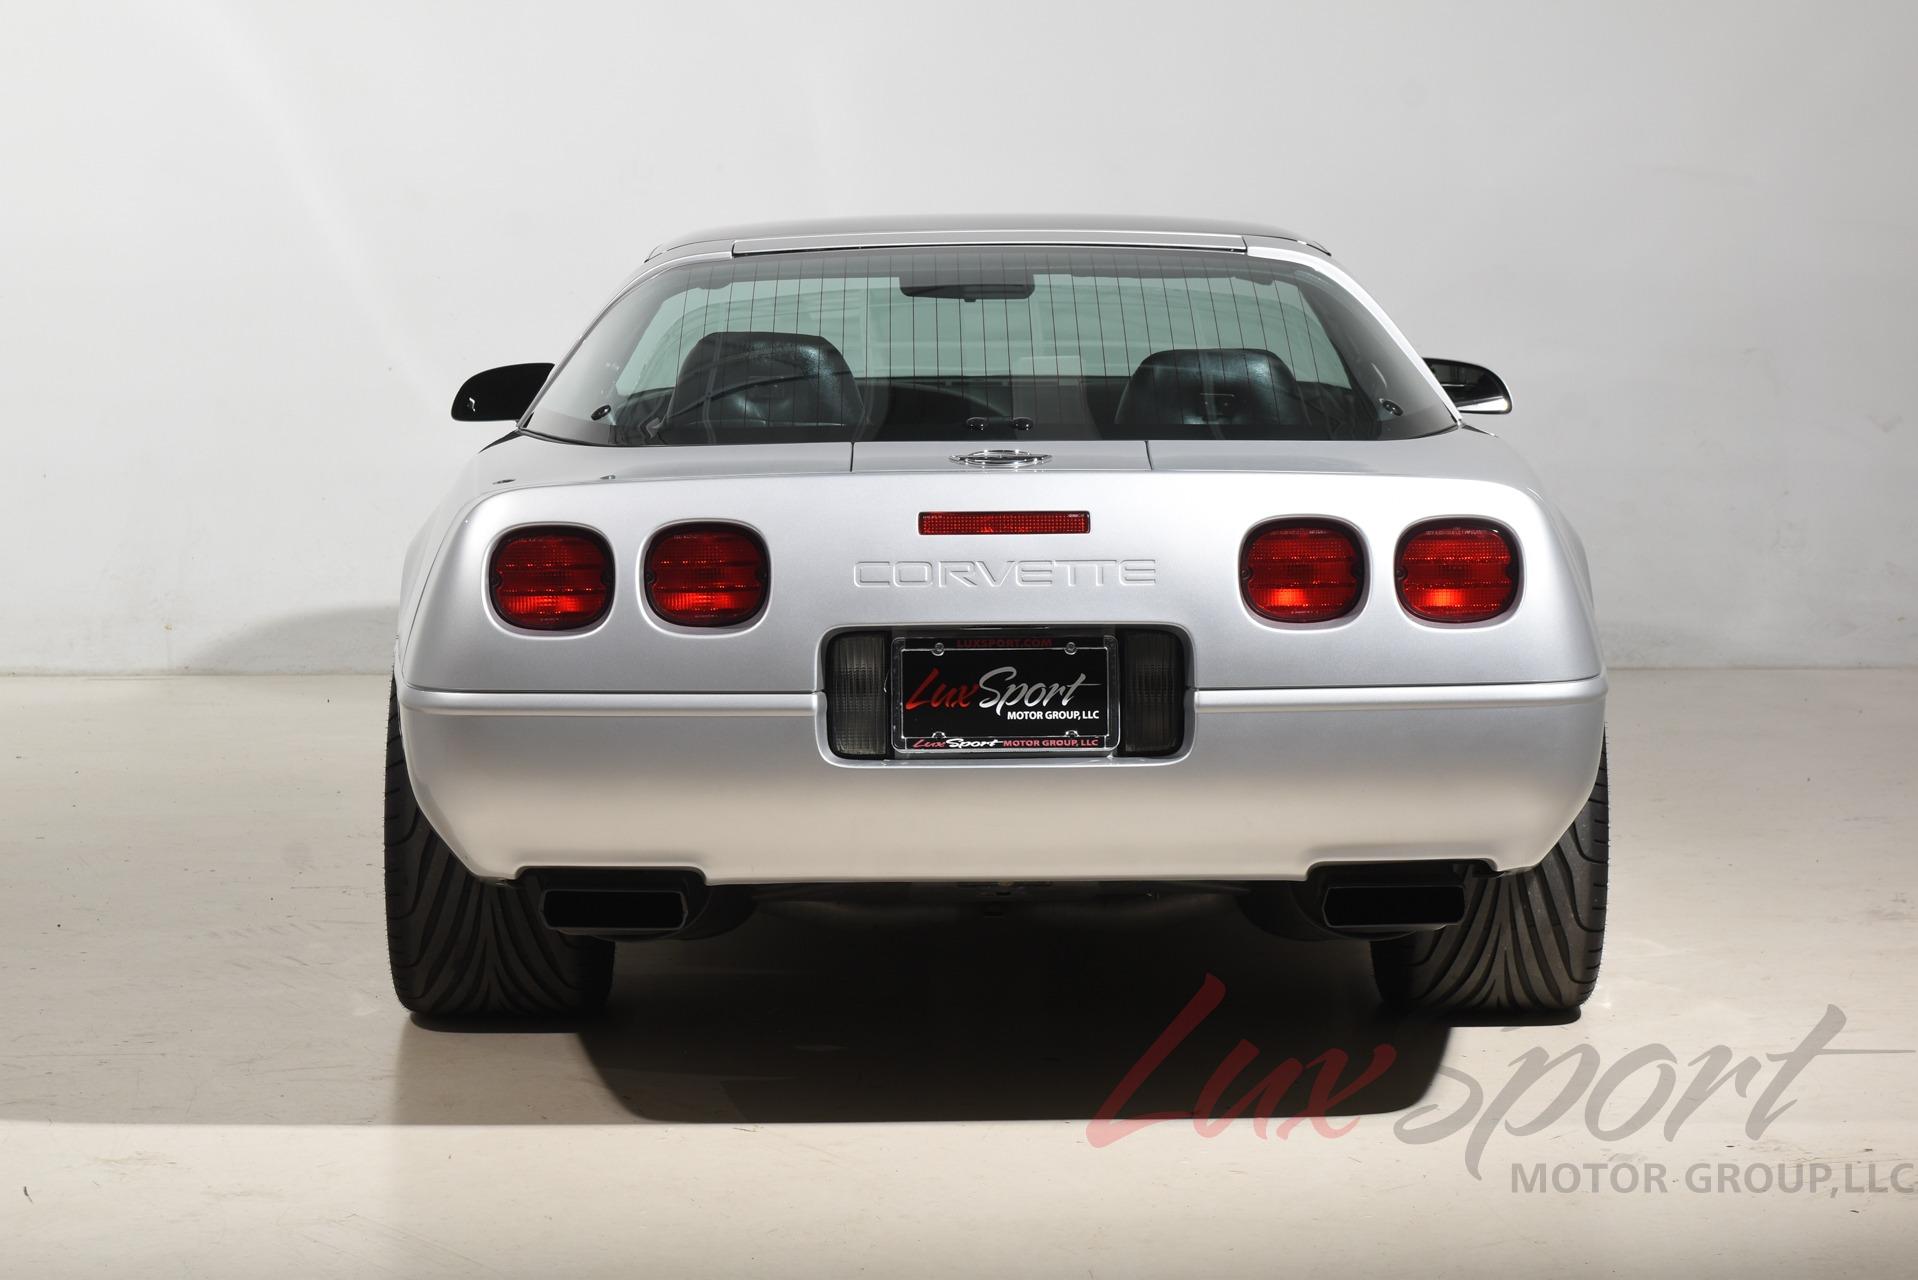 Used 1996 Chevrolet Corvette Collector Edition | Plainview, NY